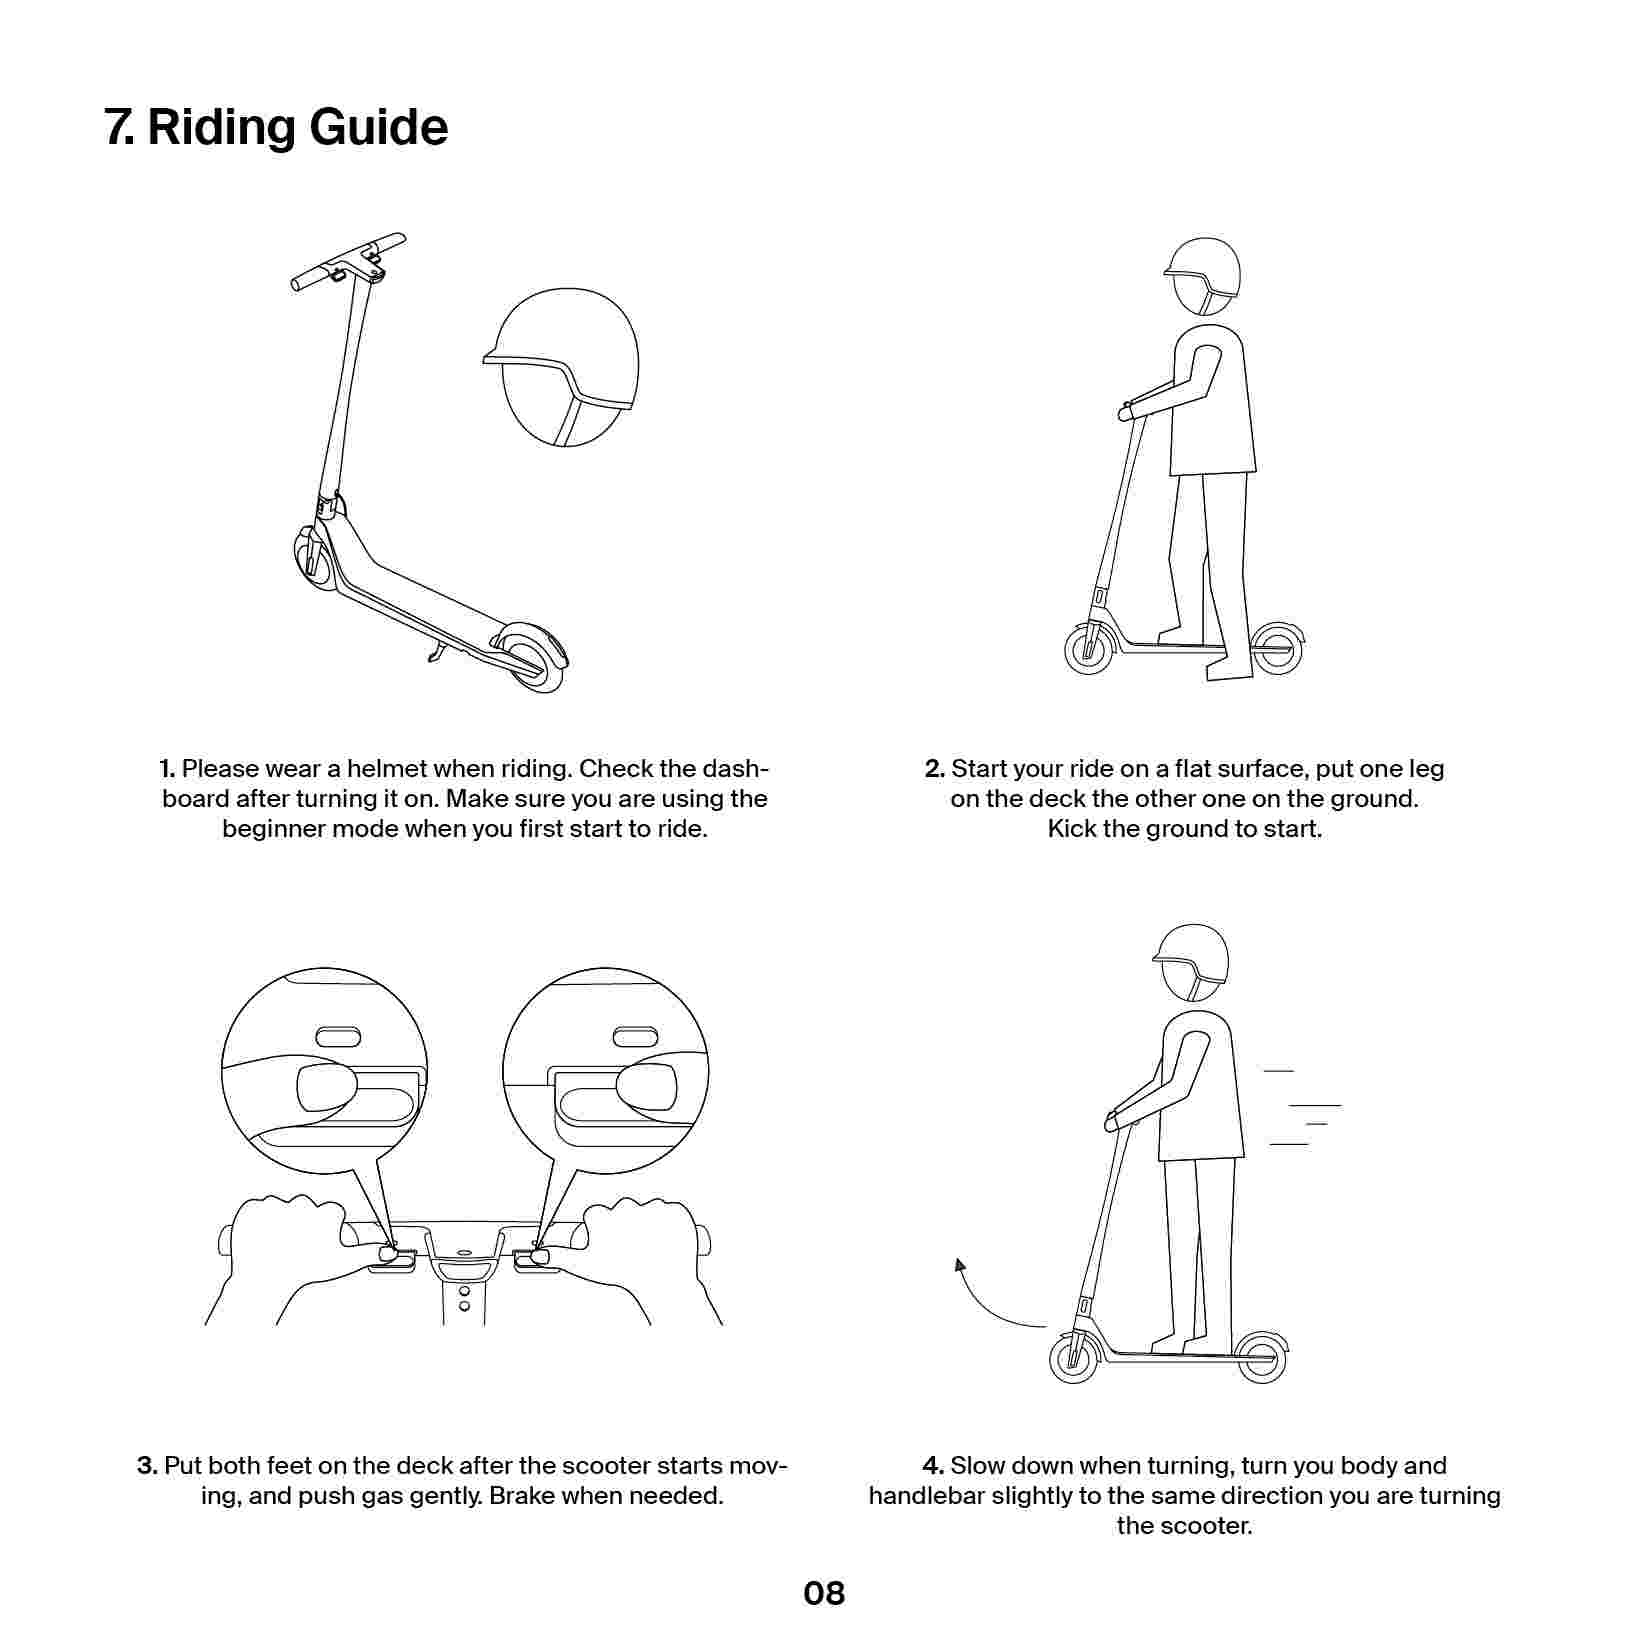 Riding Guide